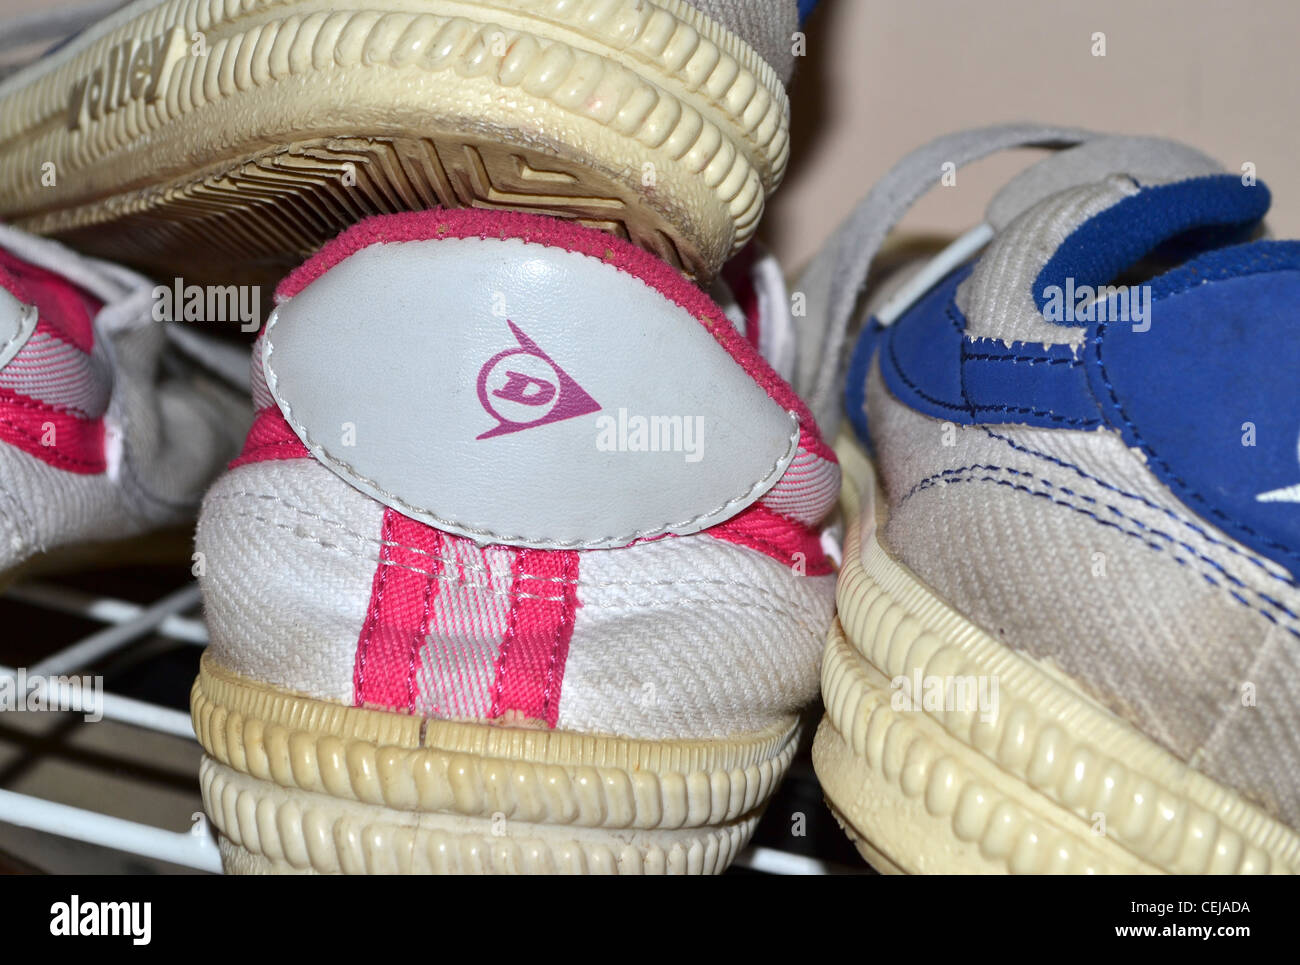 Shoe rack with dunlop volleys Stock Photo